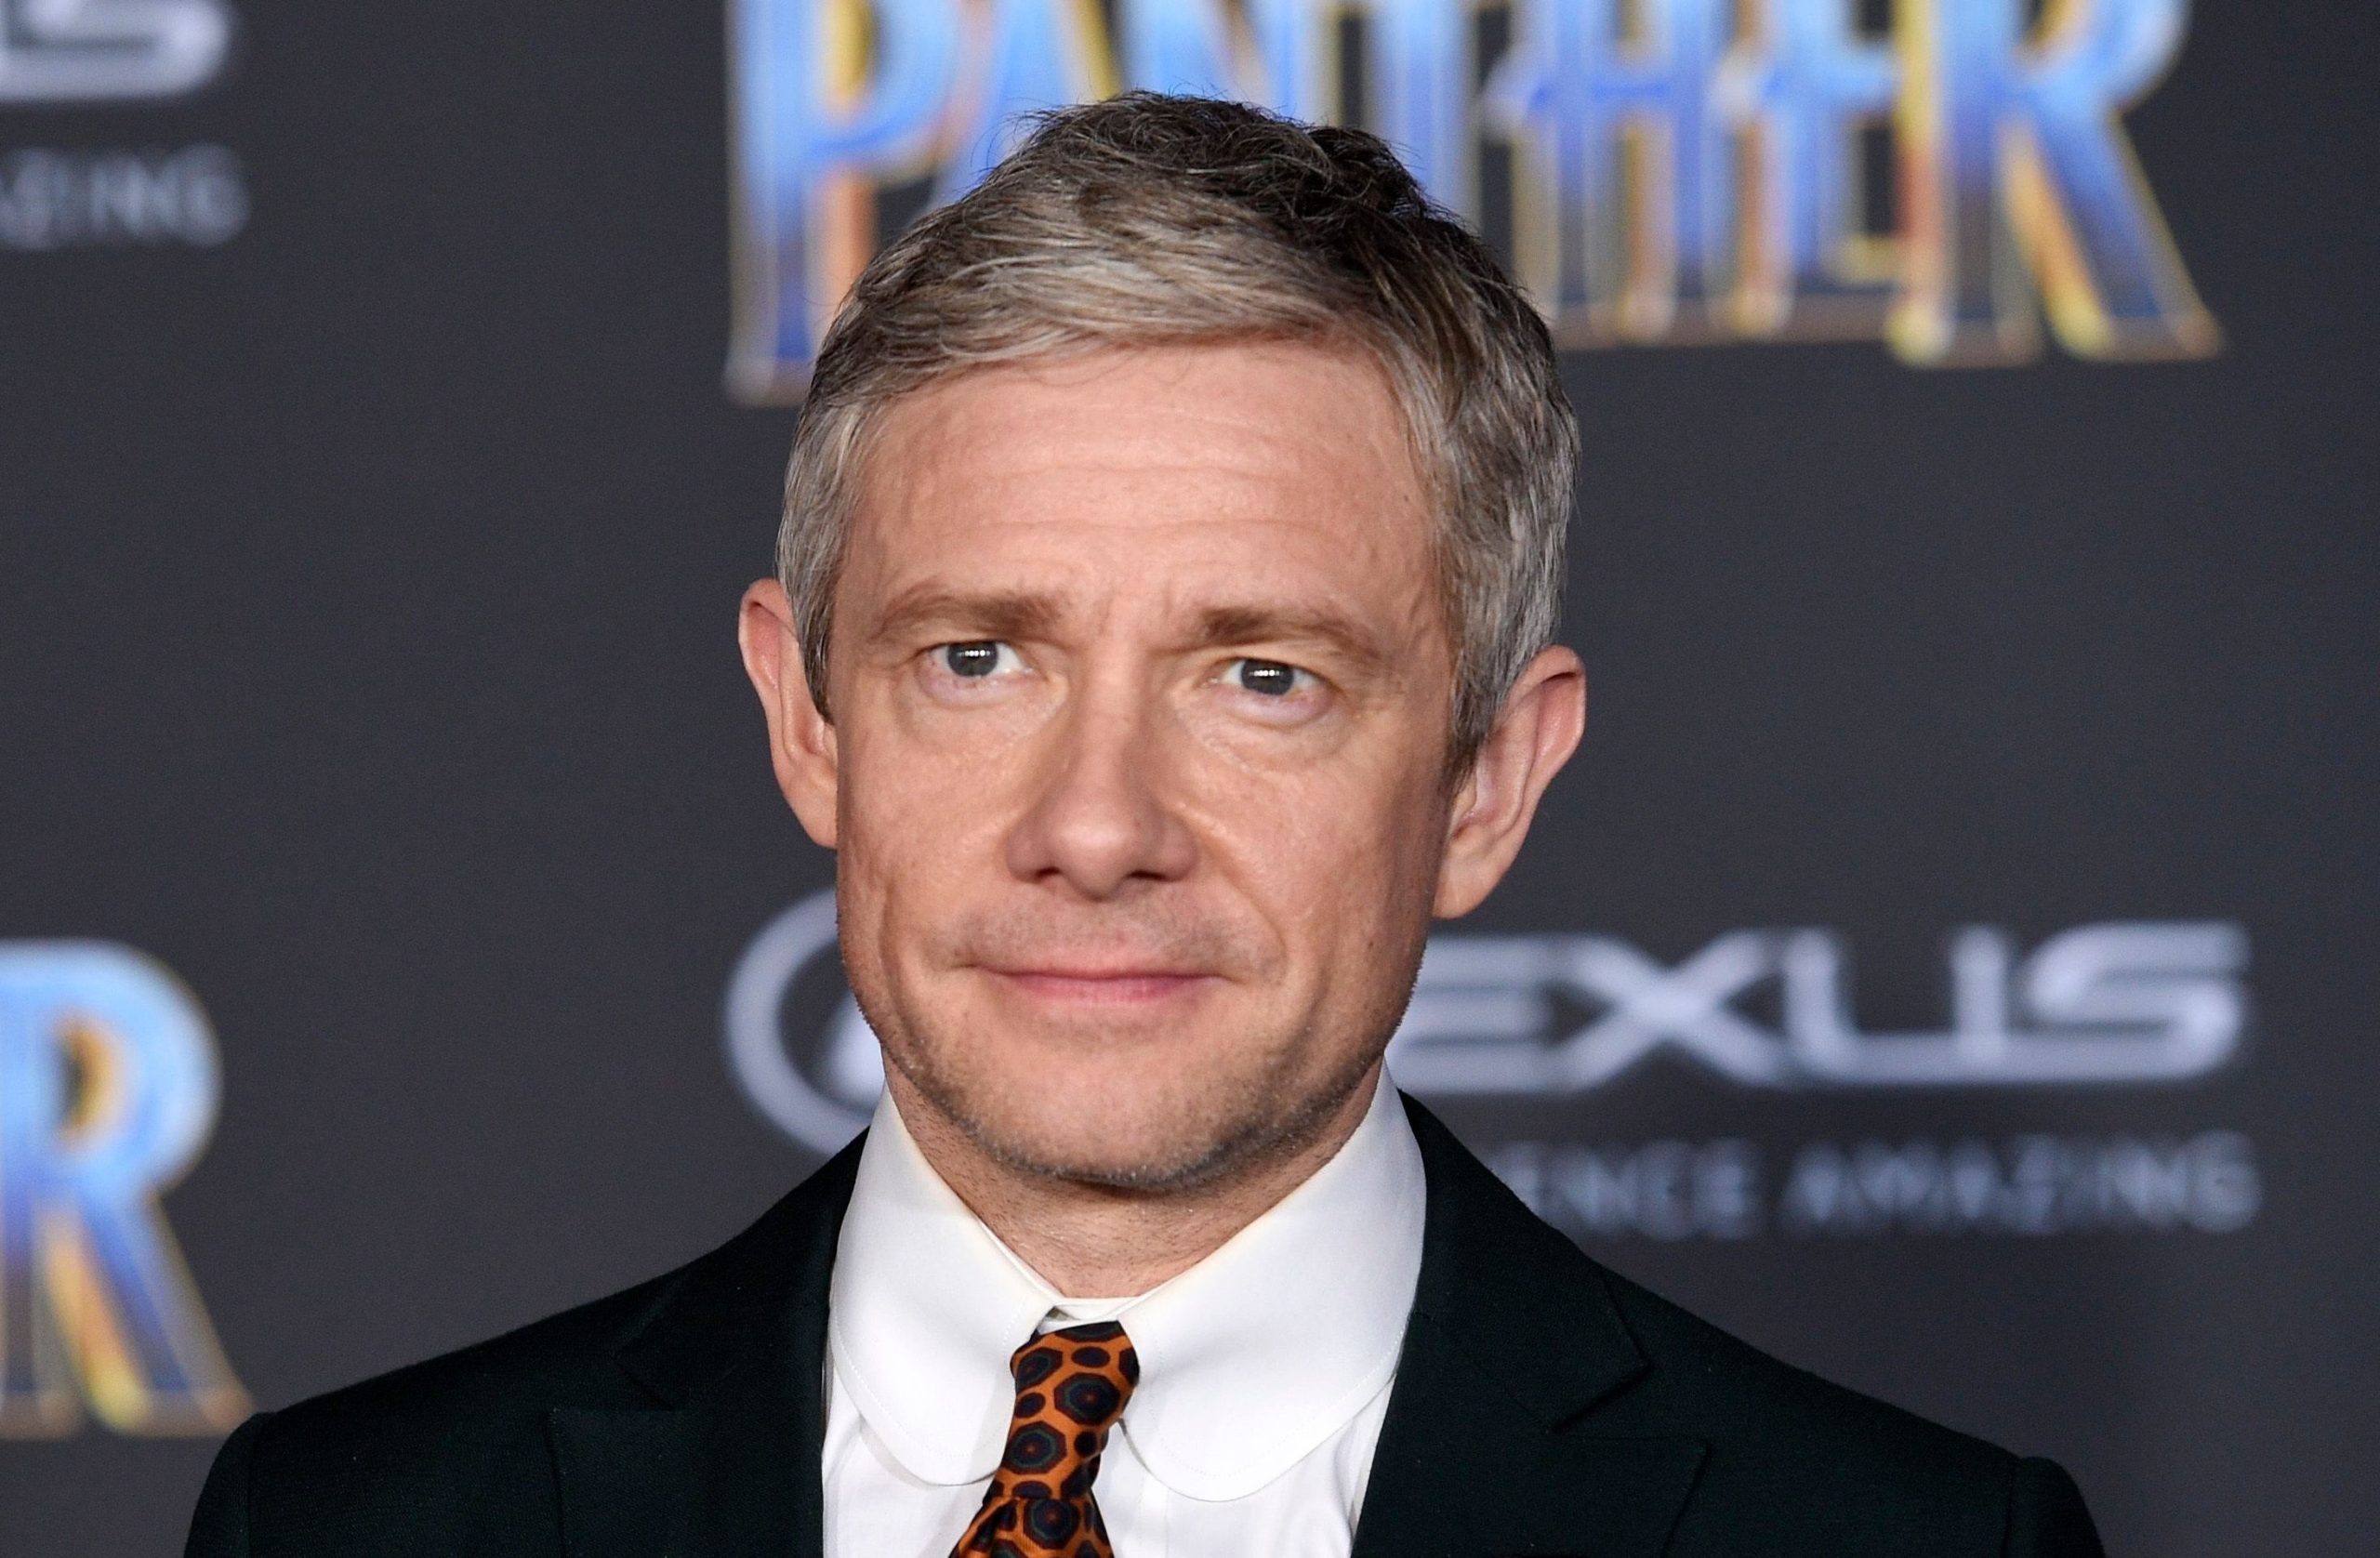 Martin Freeman Wiki, Bio, Age, Net Worth, and Other Facts